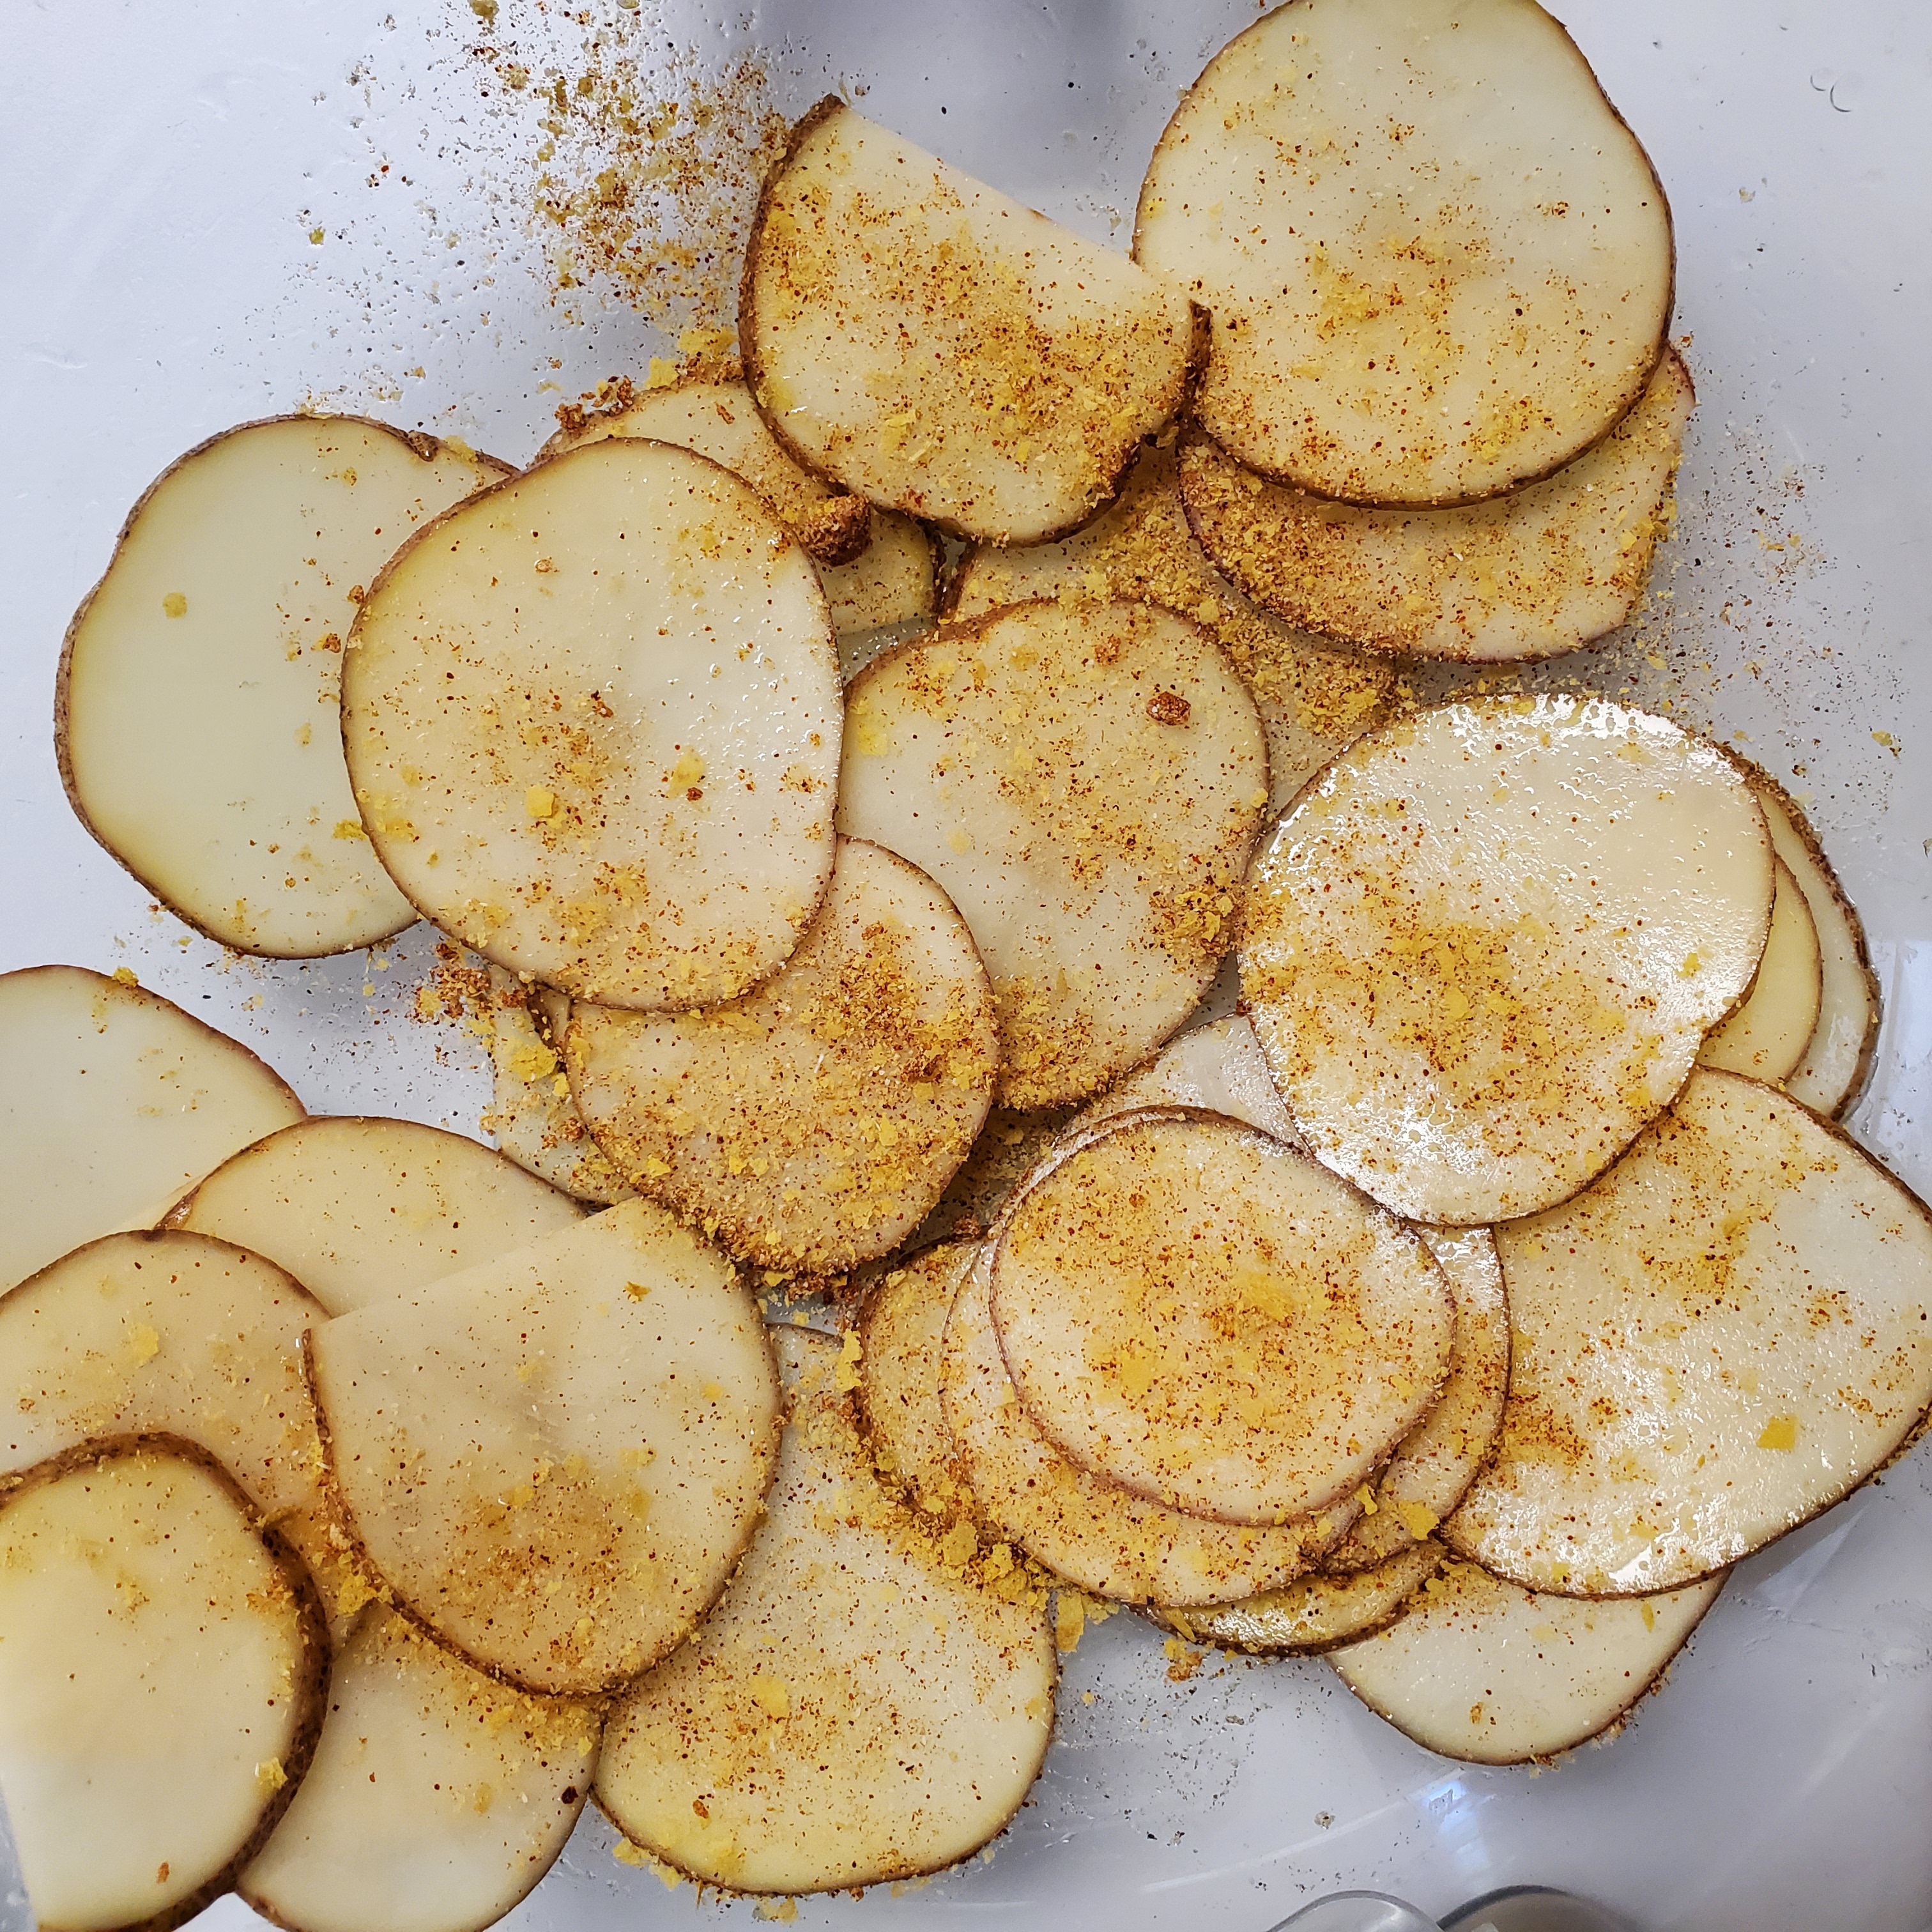 sliced potatoes with homemade bbq seasoning sprinkled on them